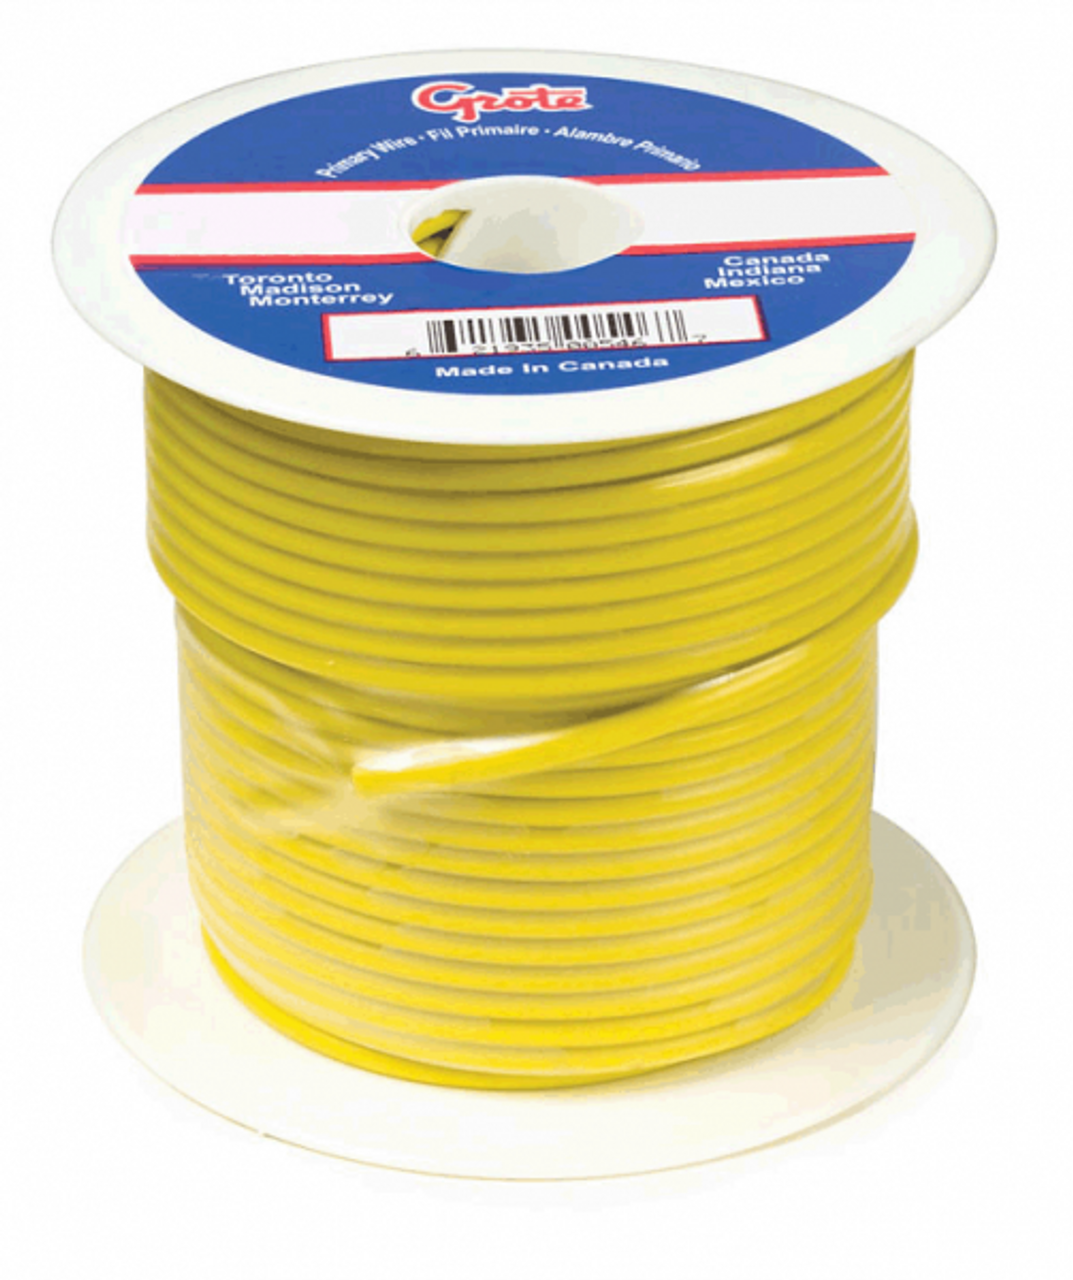 Grote 87-8011 Primary Wire- 16 GA, 100'- Yellow